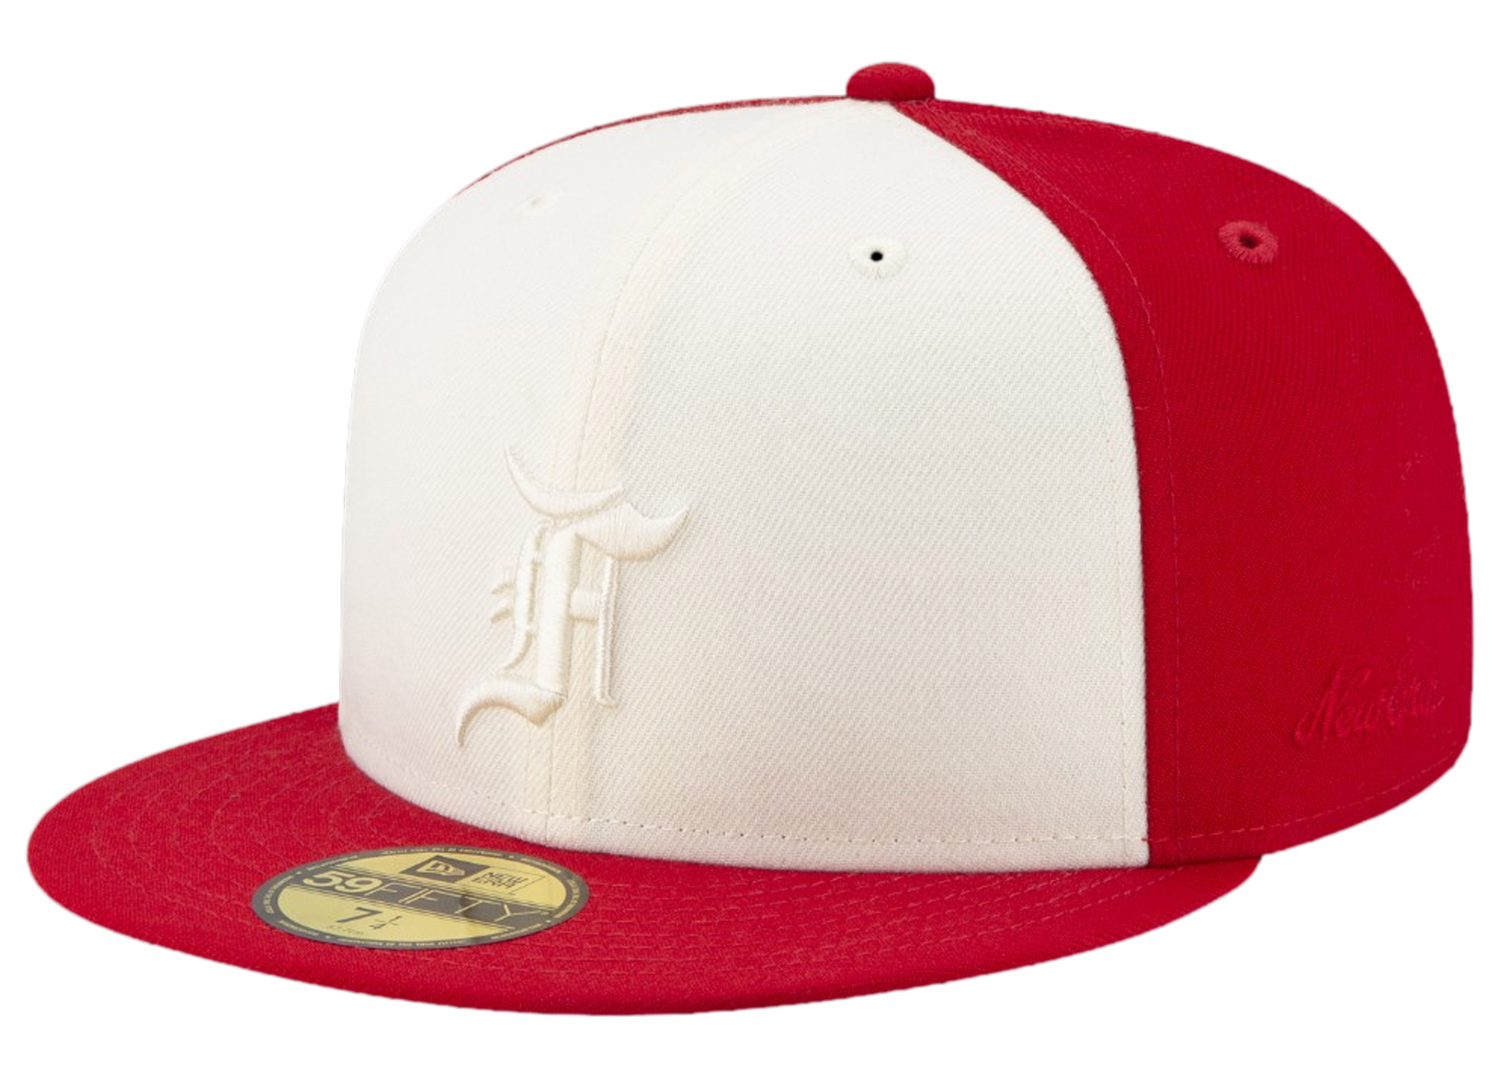 fear-of-god-new-era-59fifty-fitted-cap-colorblock-red-white-1